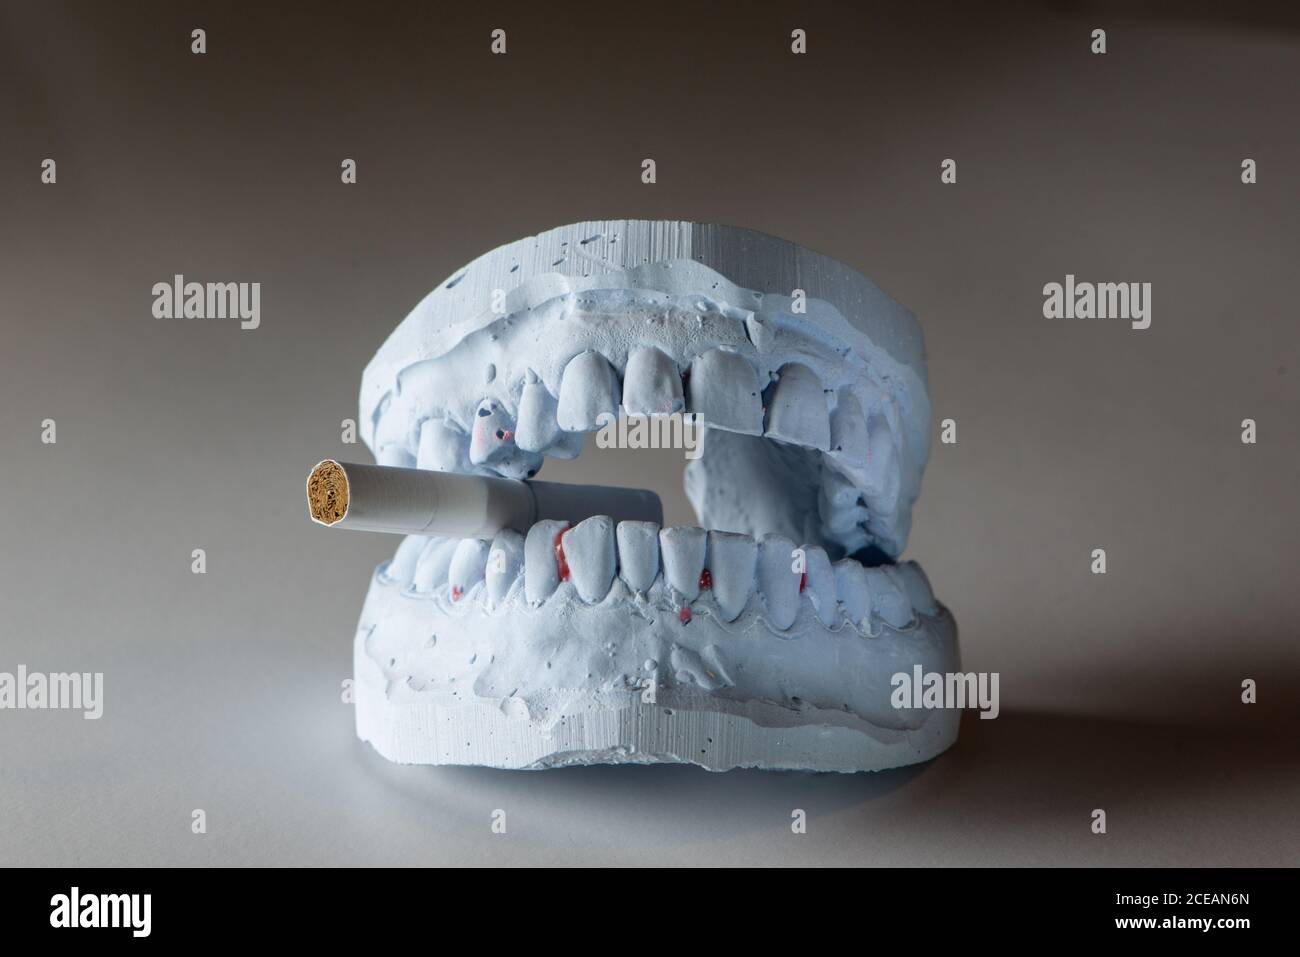 Smoking cause health damage and death. Stop smoking concept. Dental gypsum model with cigarette. Stock Photo